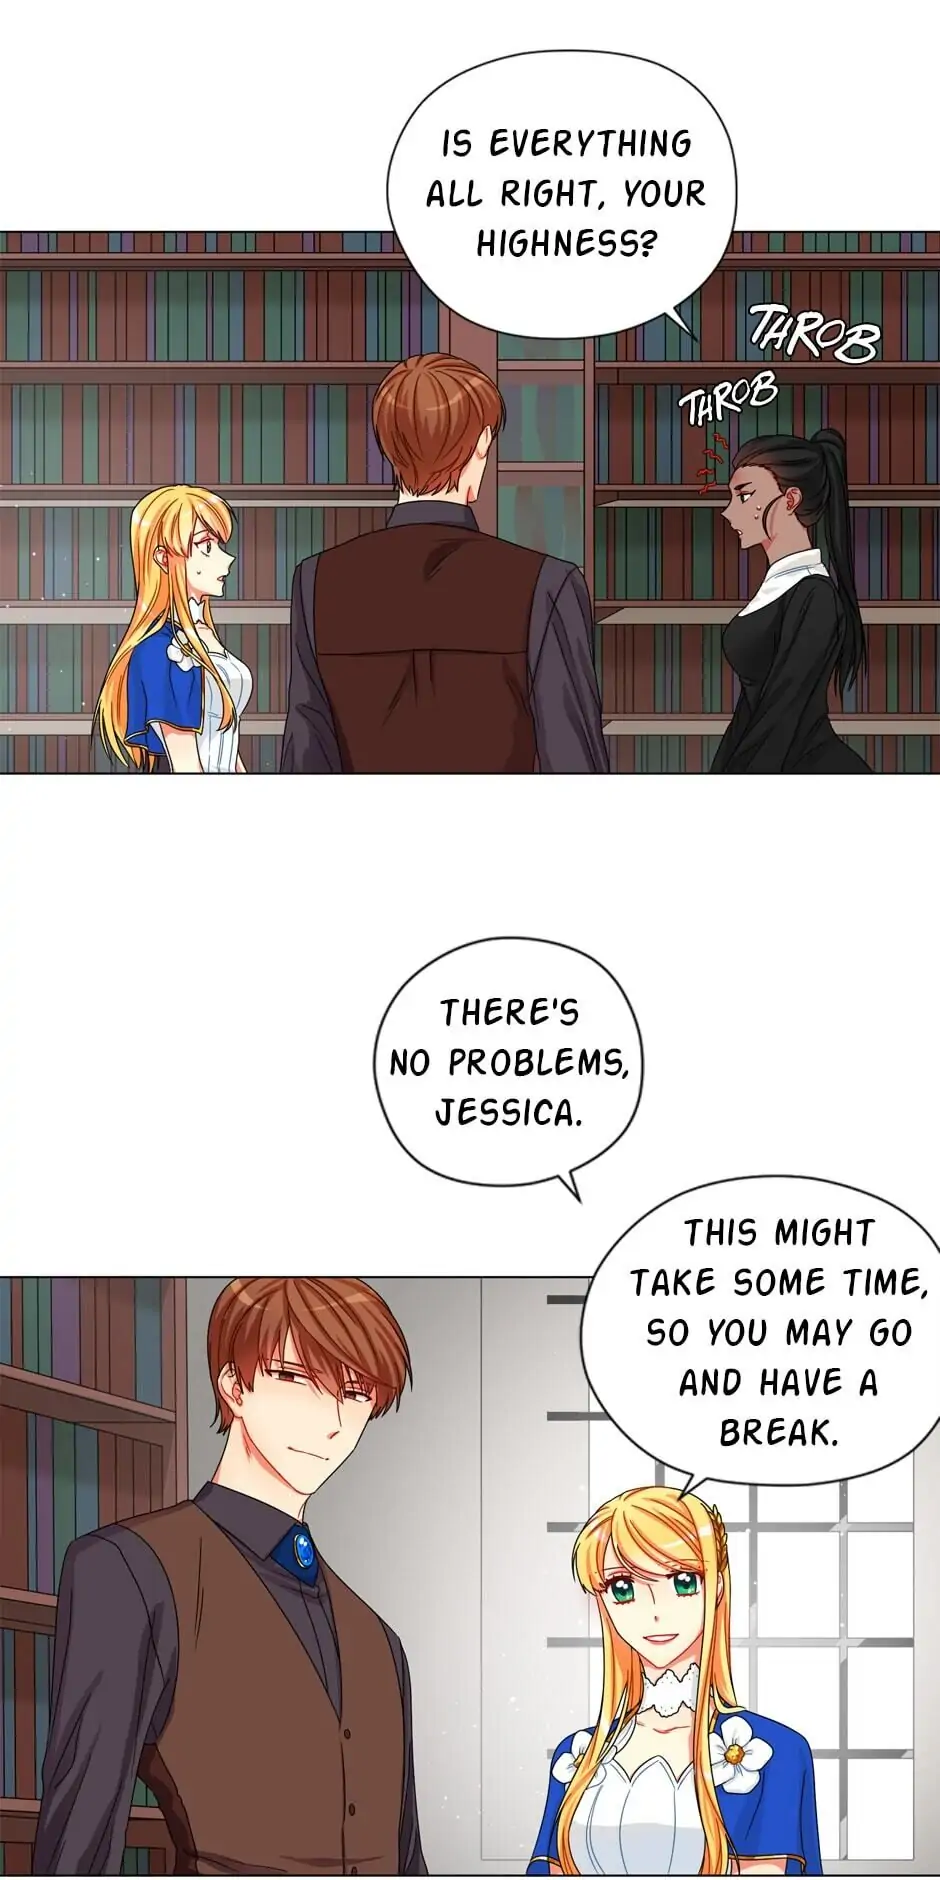 The Magic Tower Librarian chapter 7